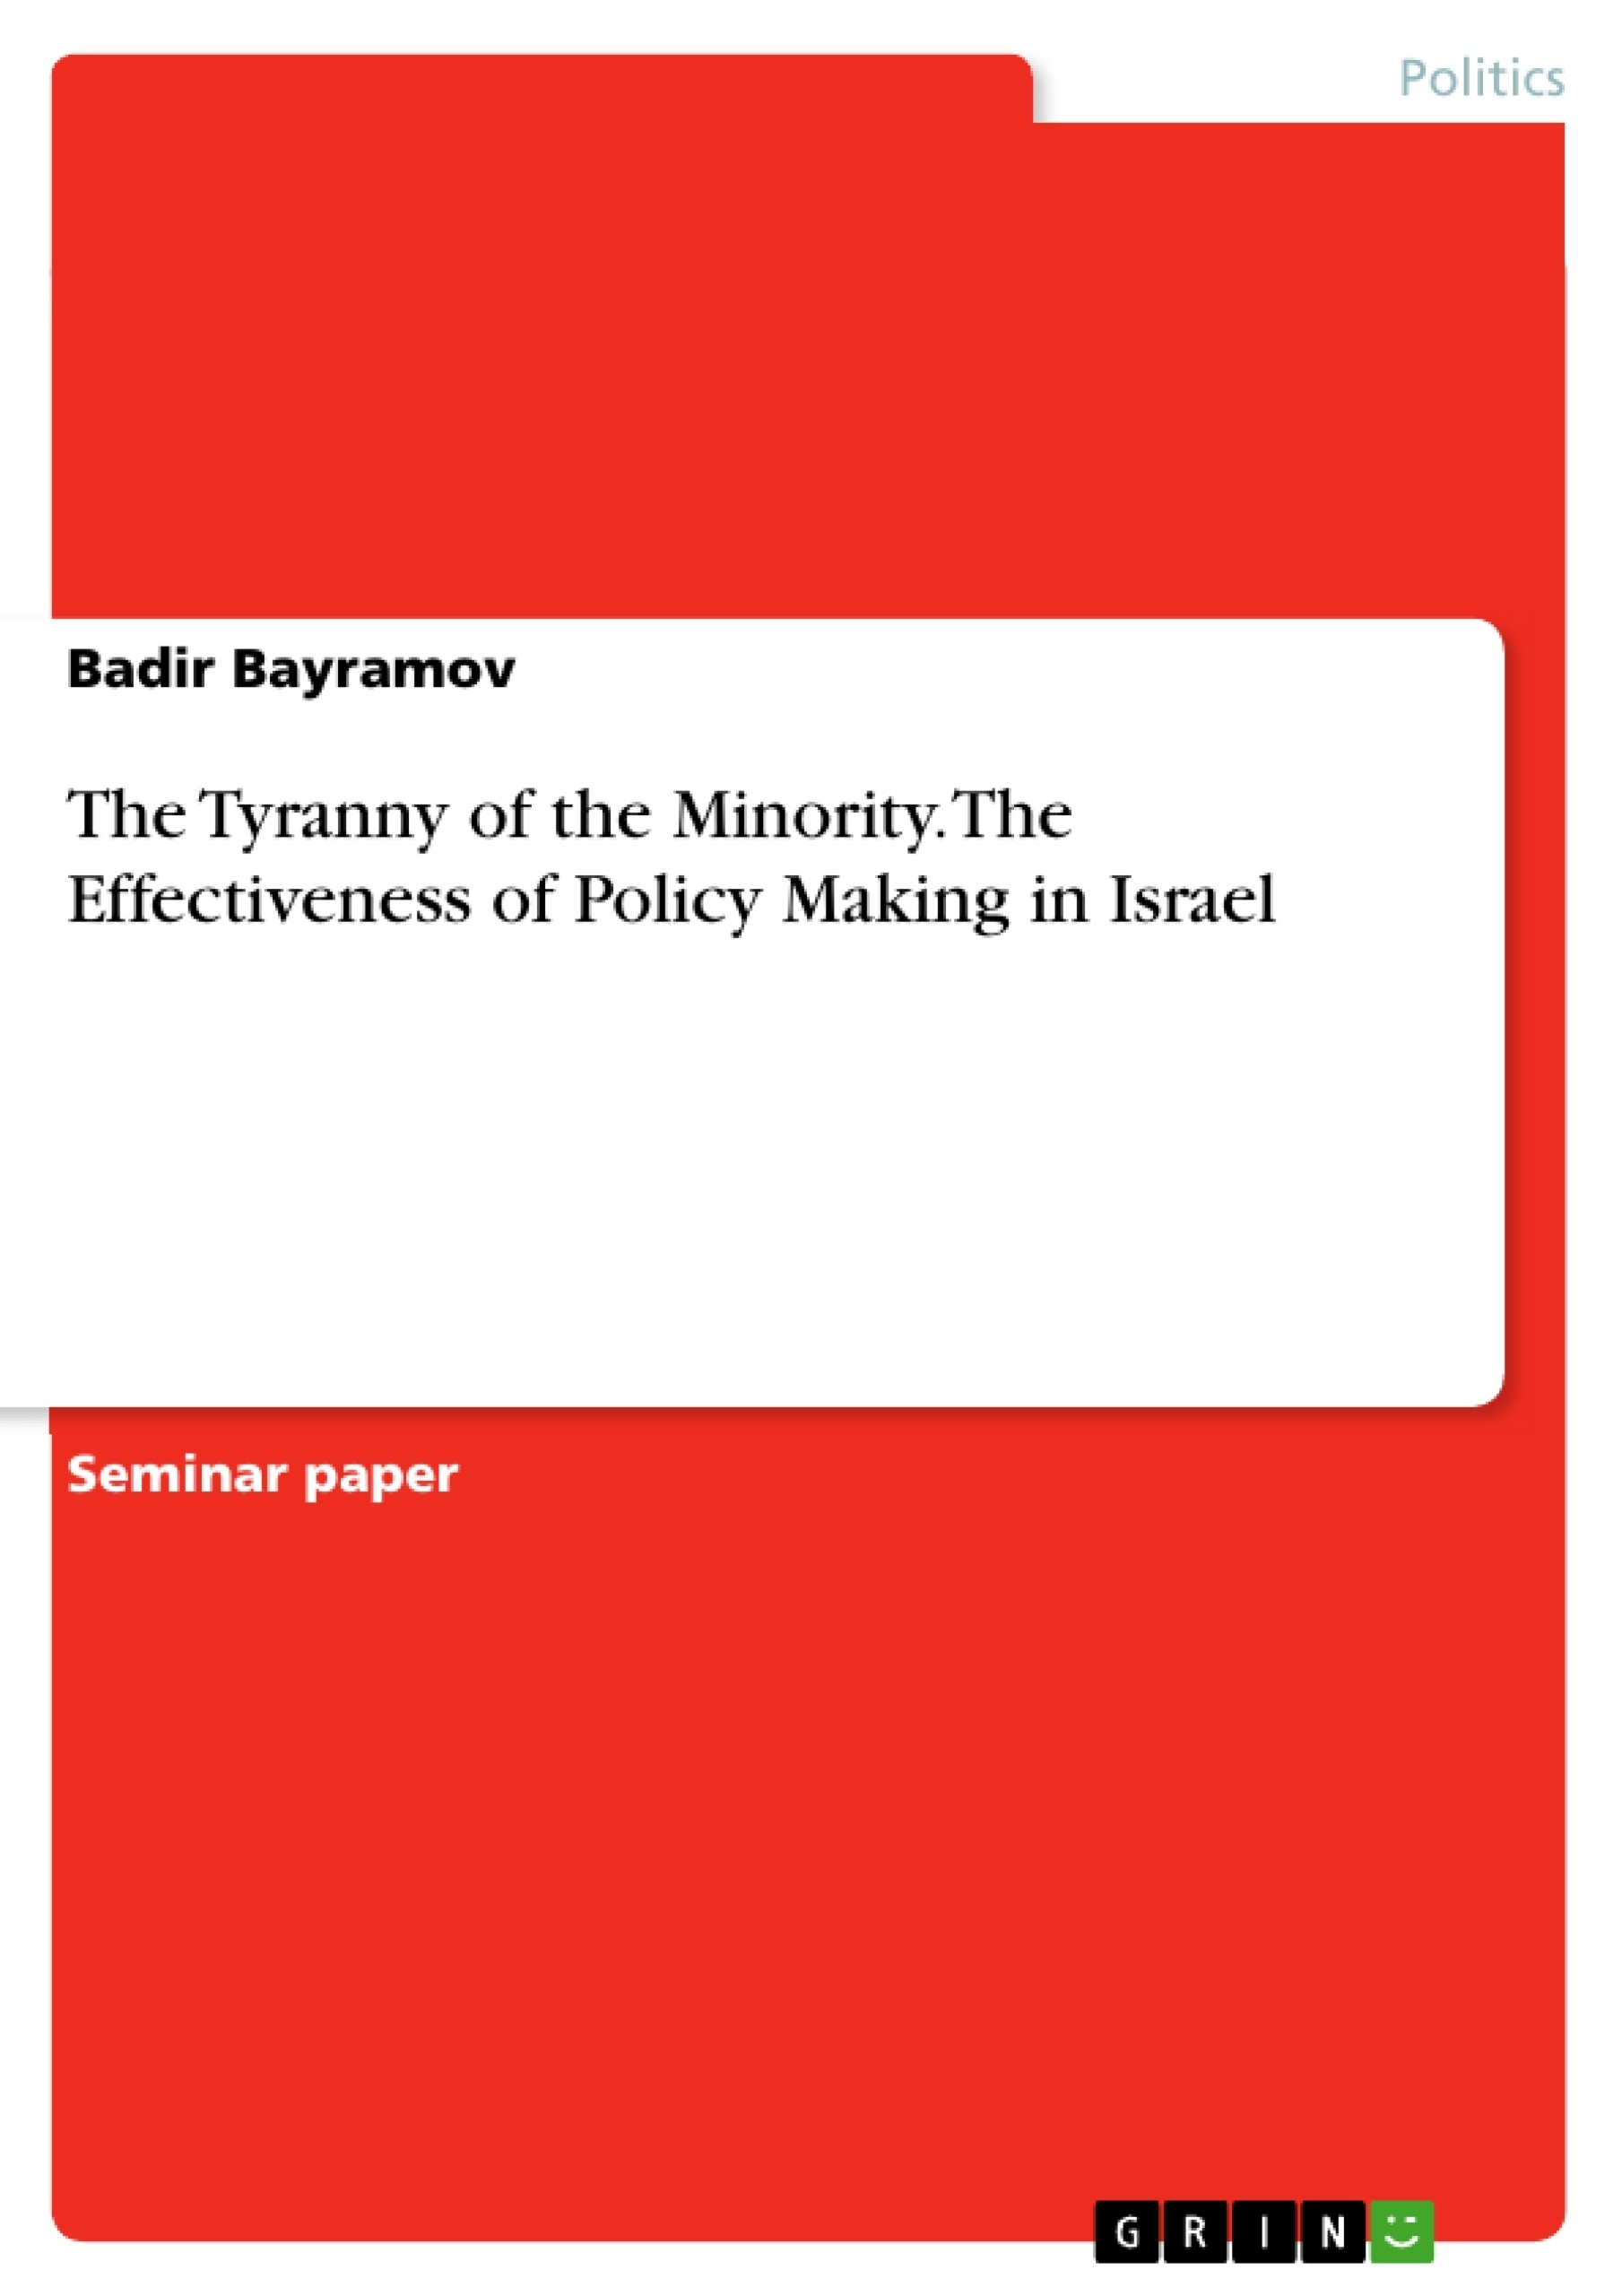 Titre: The Tyranny of the Minority. The Effectiveness of Policy Making in Israel